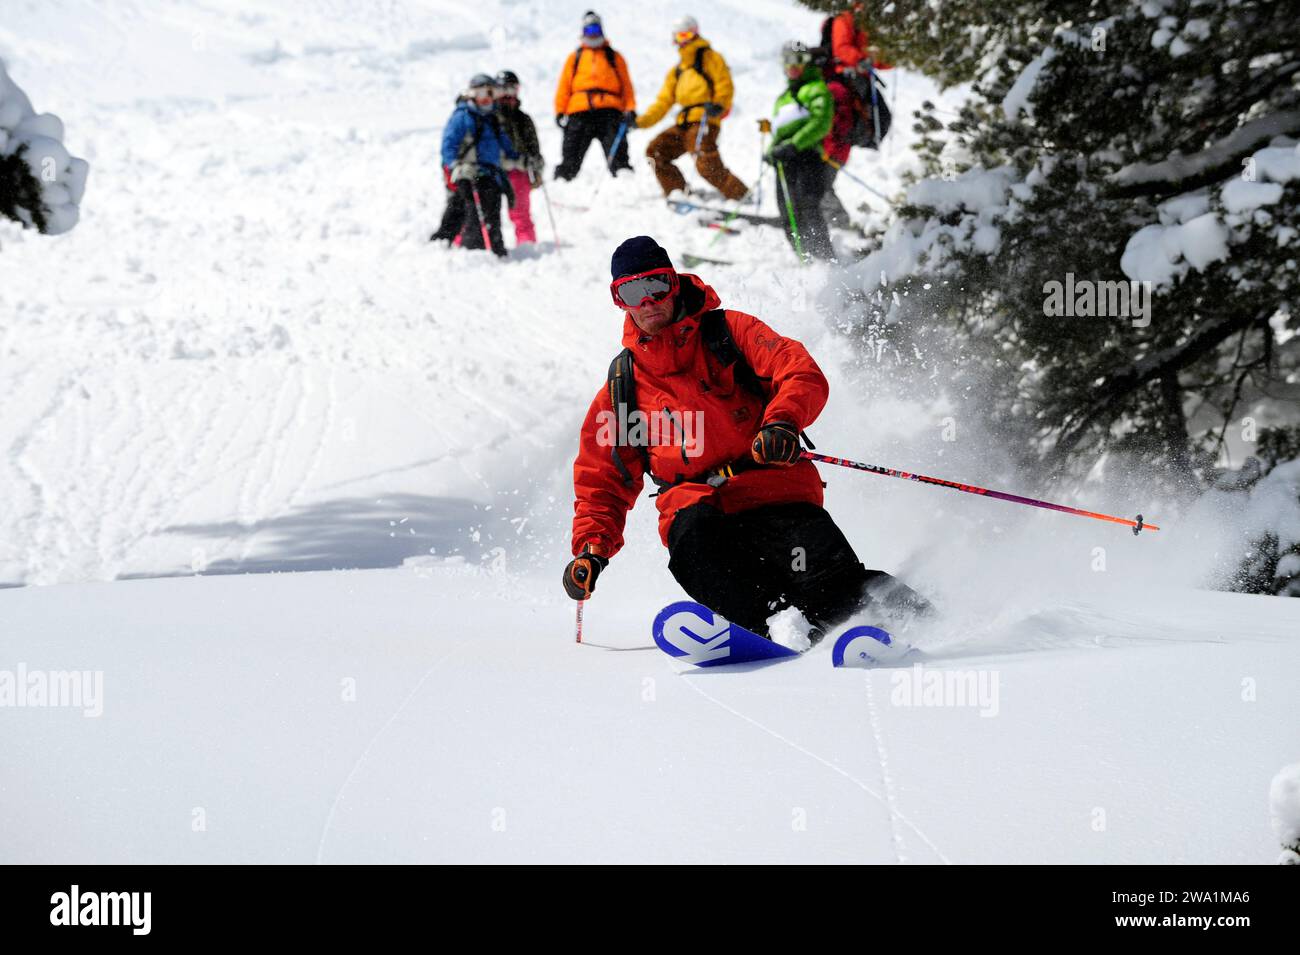 A ski instructor skiing powder with his students in the background at a mountain resort near South Lake Tahoe, California. Stock Photo